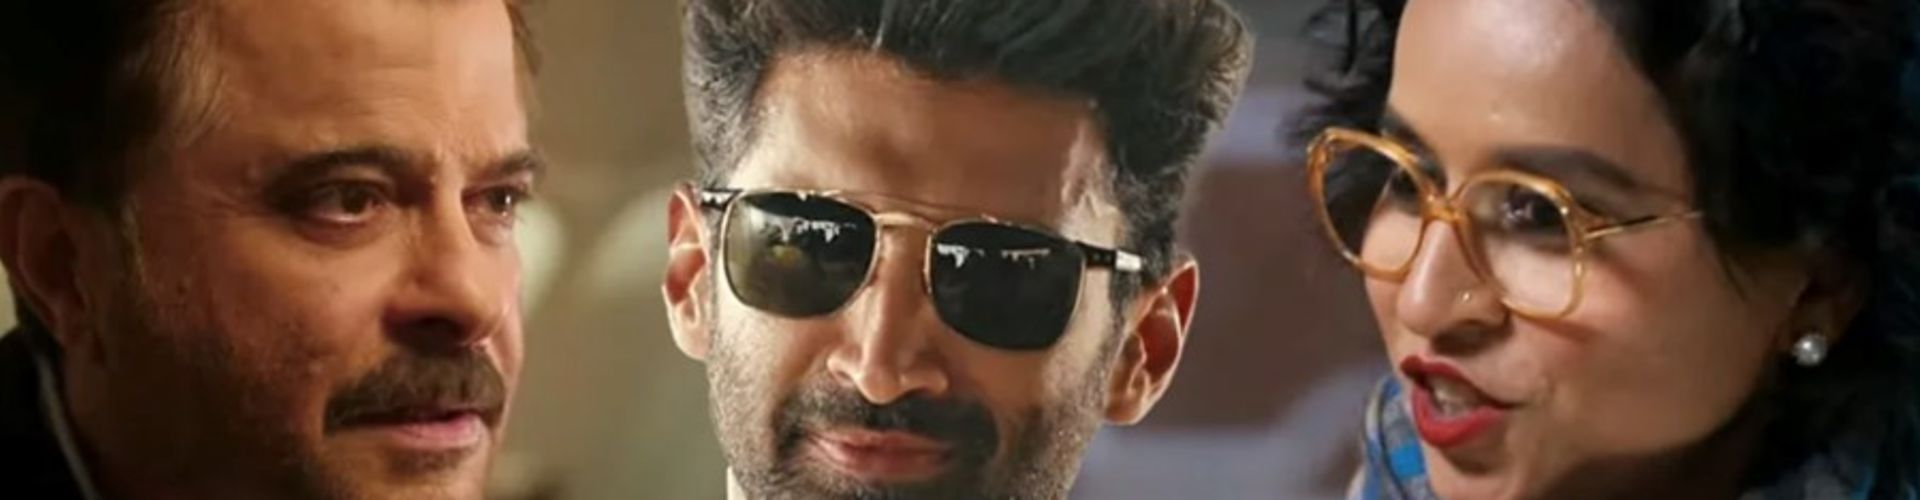 The Night Manager Trailer Is Out, Starring Anil Kapoor And Aditya Roy Kapur